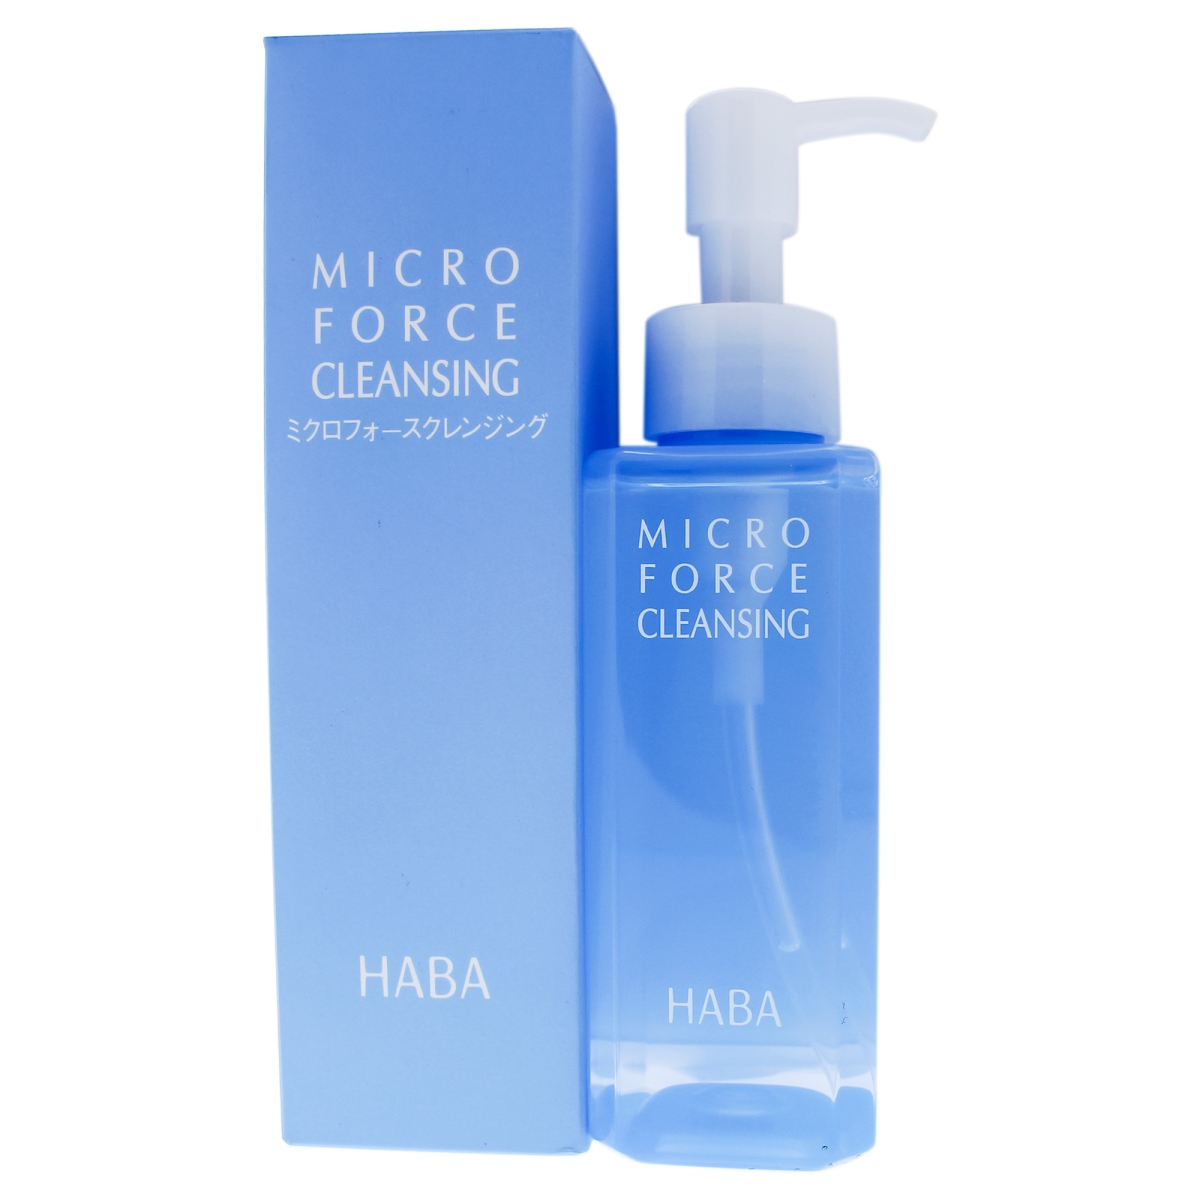 I0088219 Micro Force Cleansing For Women - 4 Oz